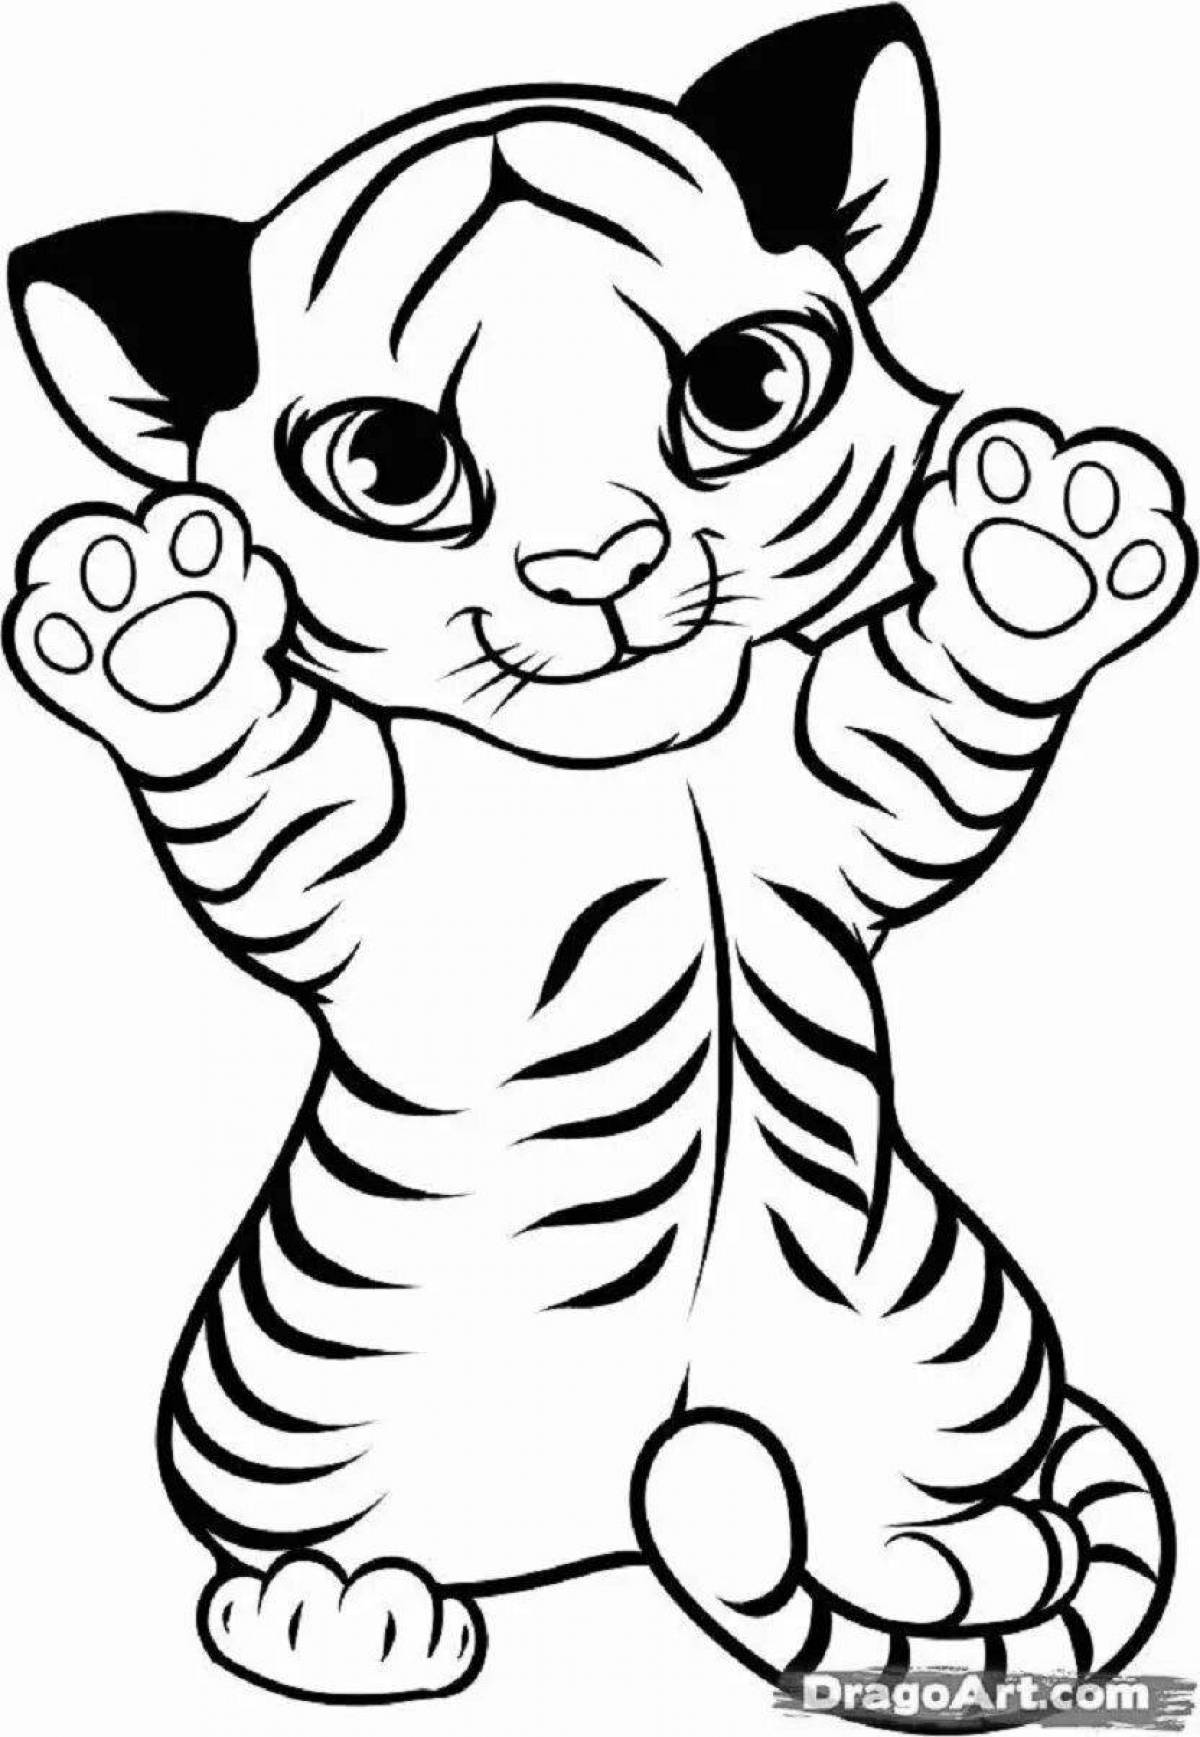 Animated tiger cub coloring page for girls